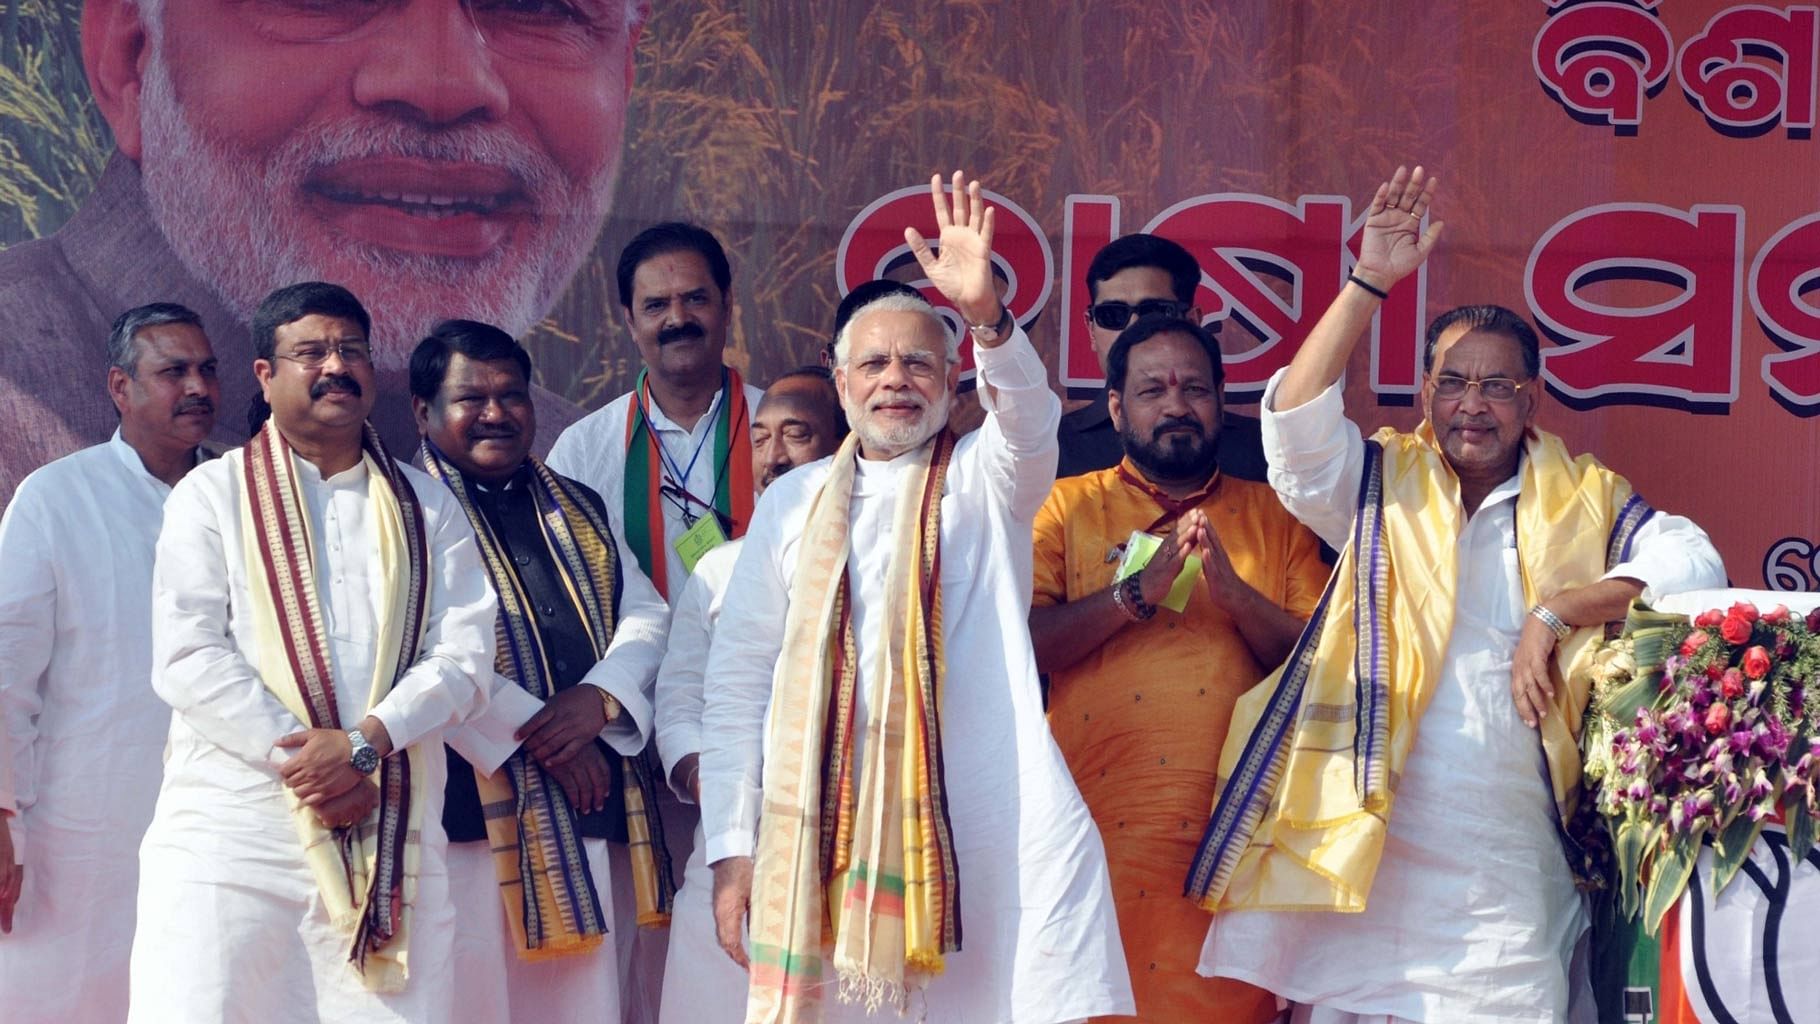  Prime Minister Narendra Modi with Union Agriculture Minister Radha Mohan Singh and Union Petroleum Minister Dharmendra Pradhan during a farmers’ rally in Bargarh district of Odisha on 21 February 2016.&nbsp;